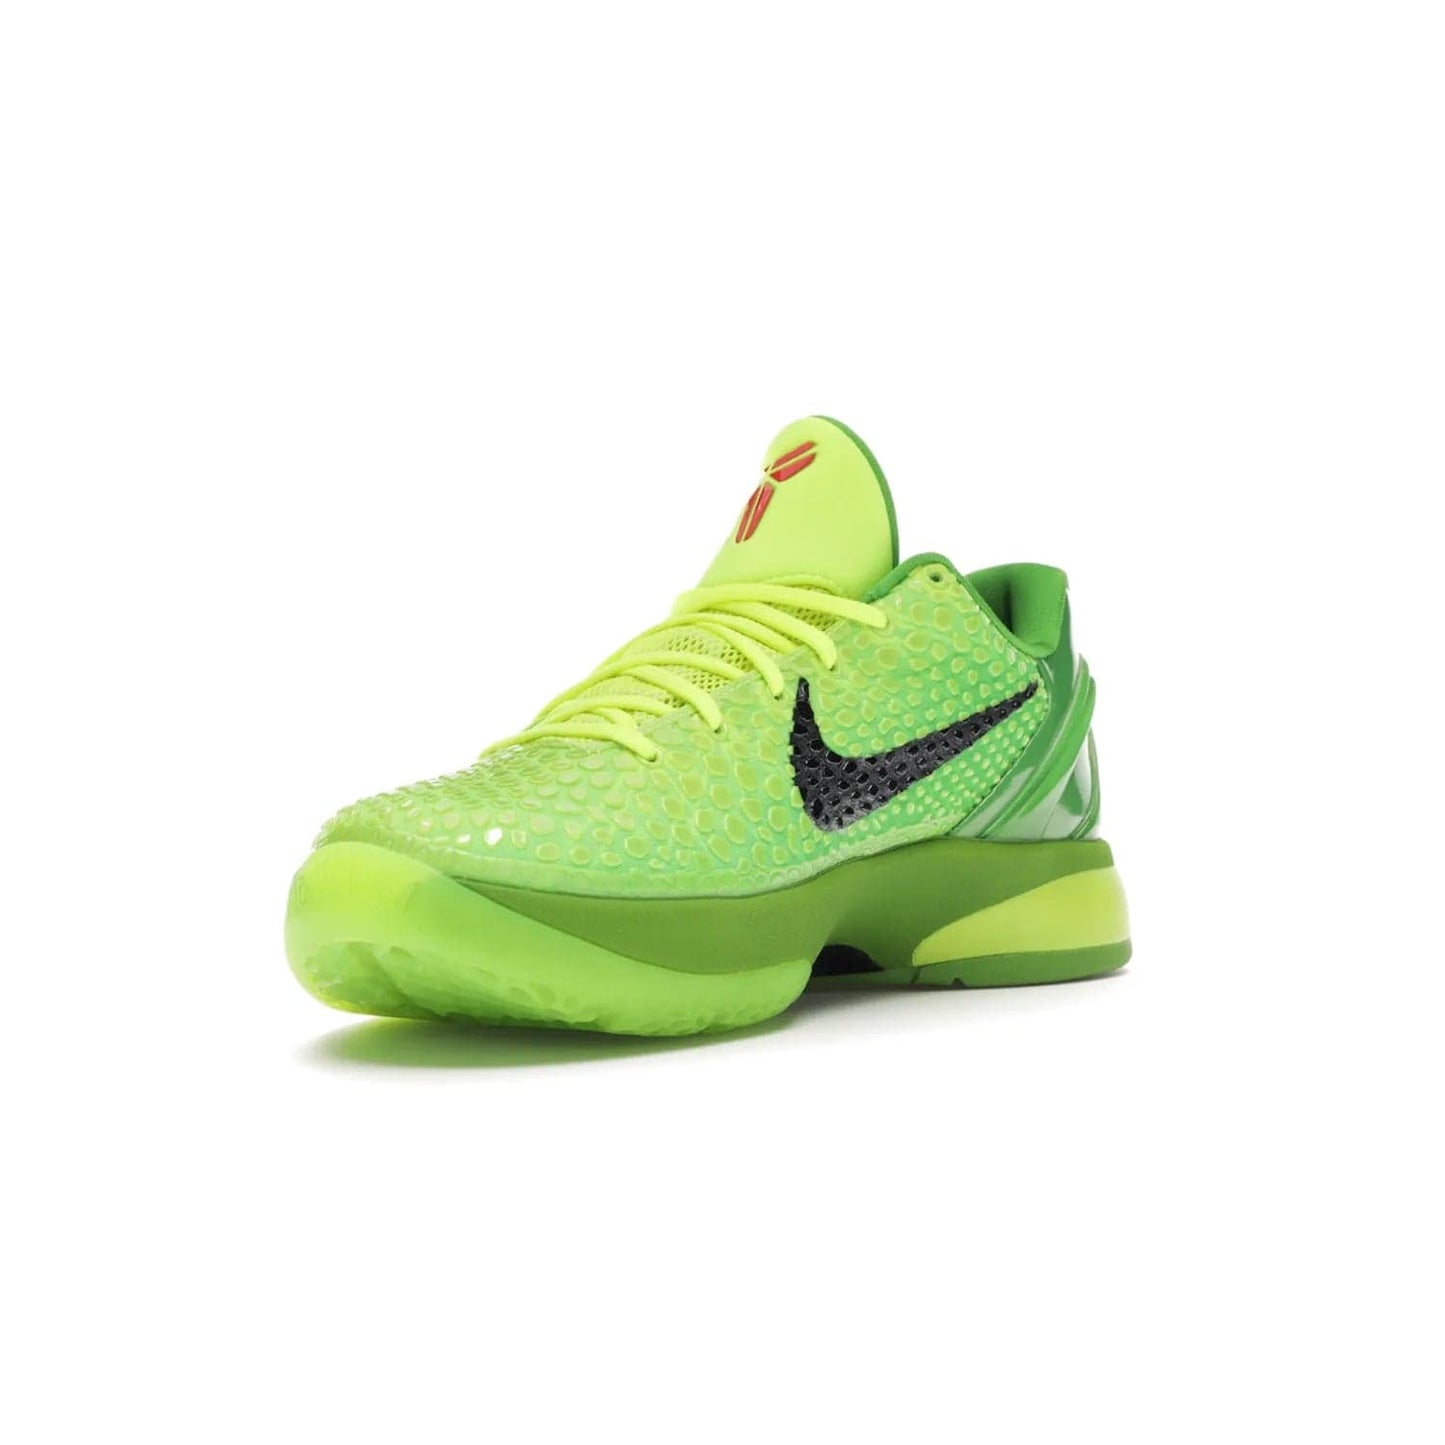 Nike Kobe 6 Protro Grinch (2020) - Image 14 - Only at www.BallersClubKickz.com - #
The Nike Kobe 6 Protro Grinch updates the iconic 2011 design with modern tech like a Zoom Air cushioning system, scaled-down traction, and updated silhouette. Experience the textured Green Apple and Volt upper plus bright red and green accents for $180.